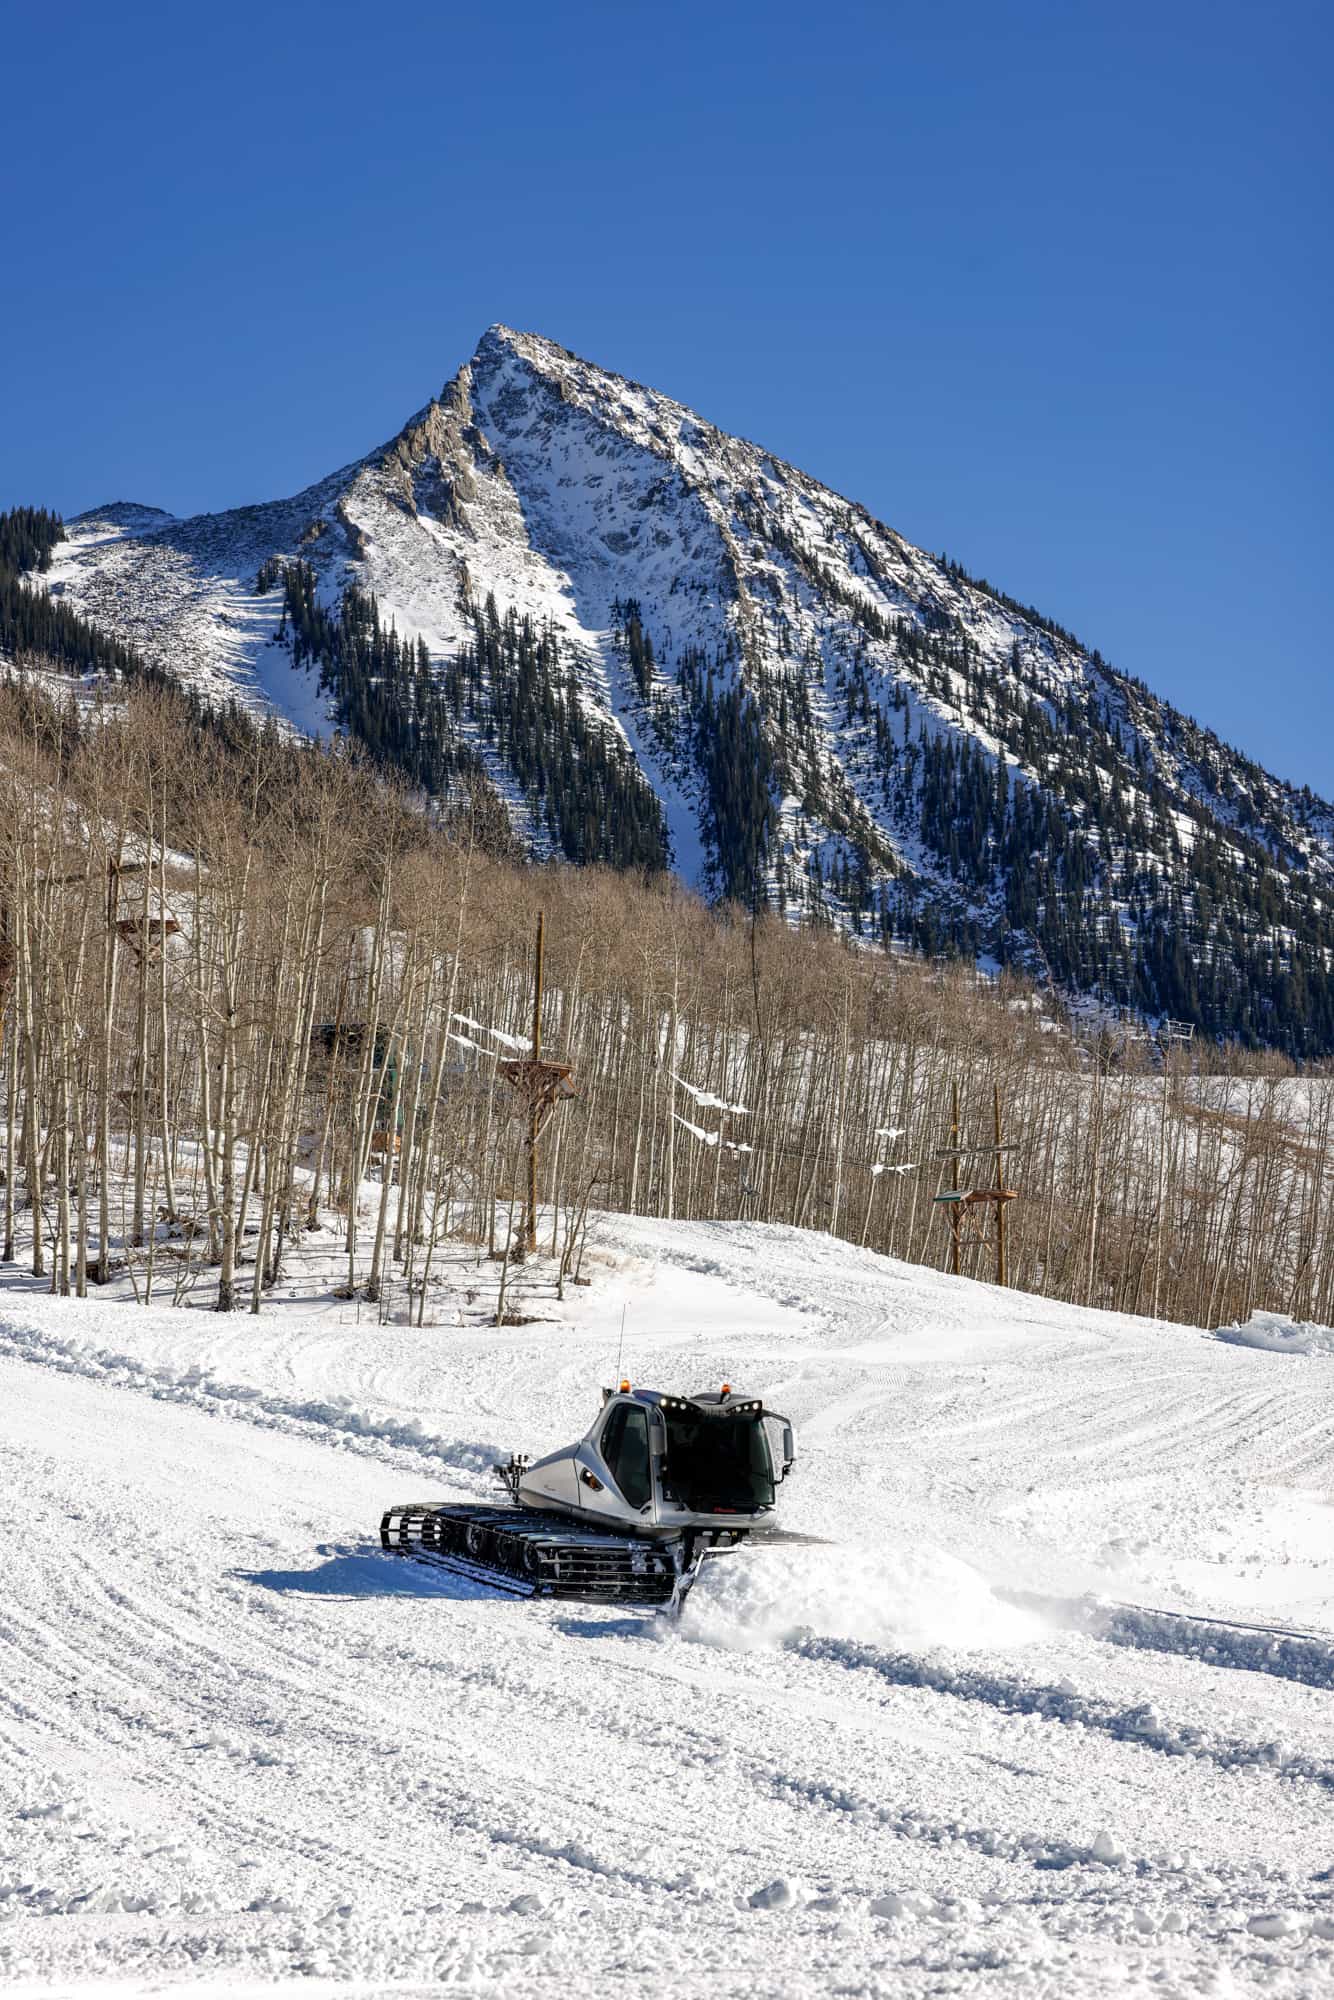 Ski and Ride Season Kicks Off in Crested Butte, CO, With Opening Day